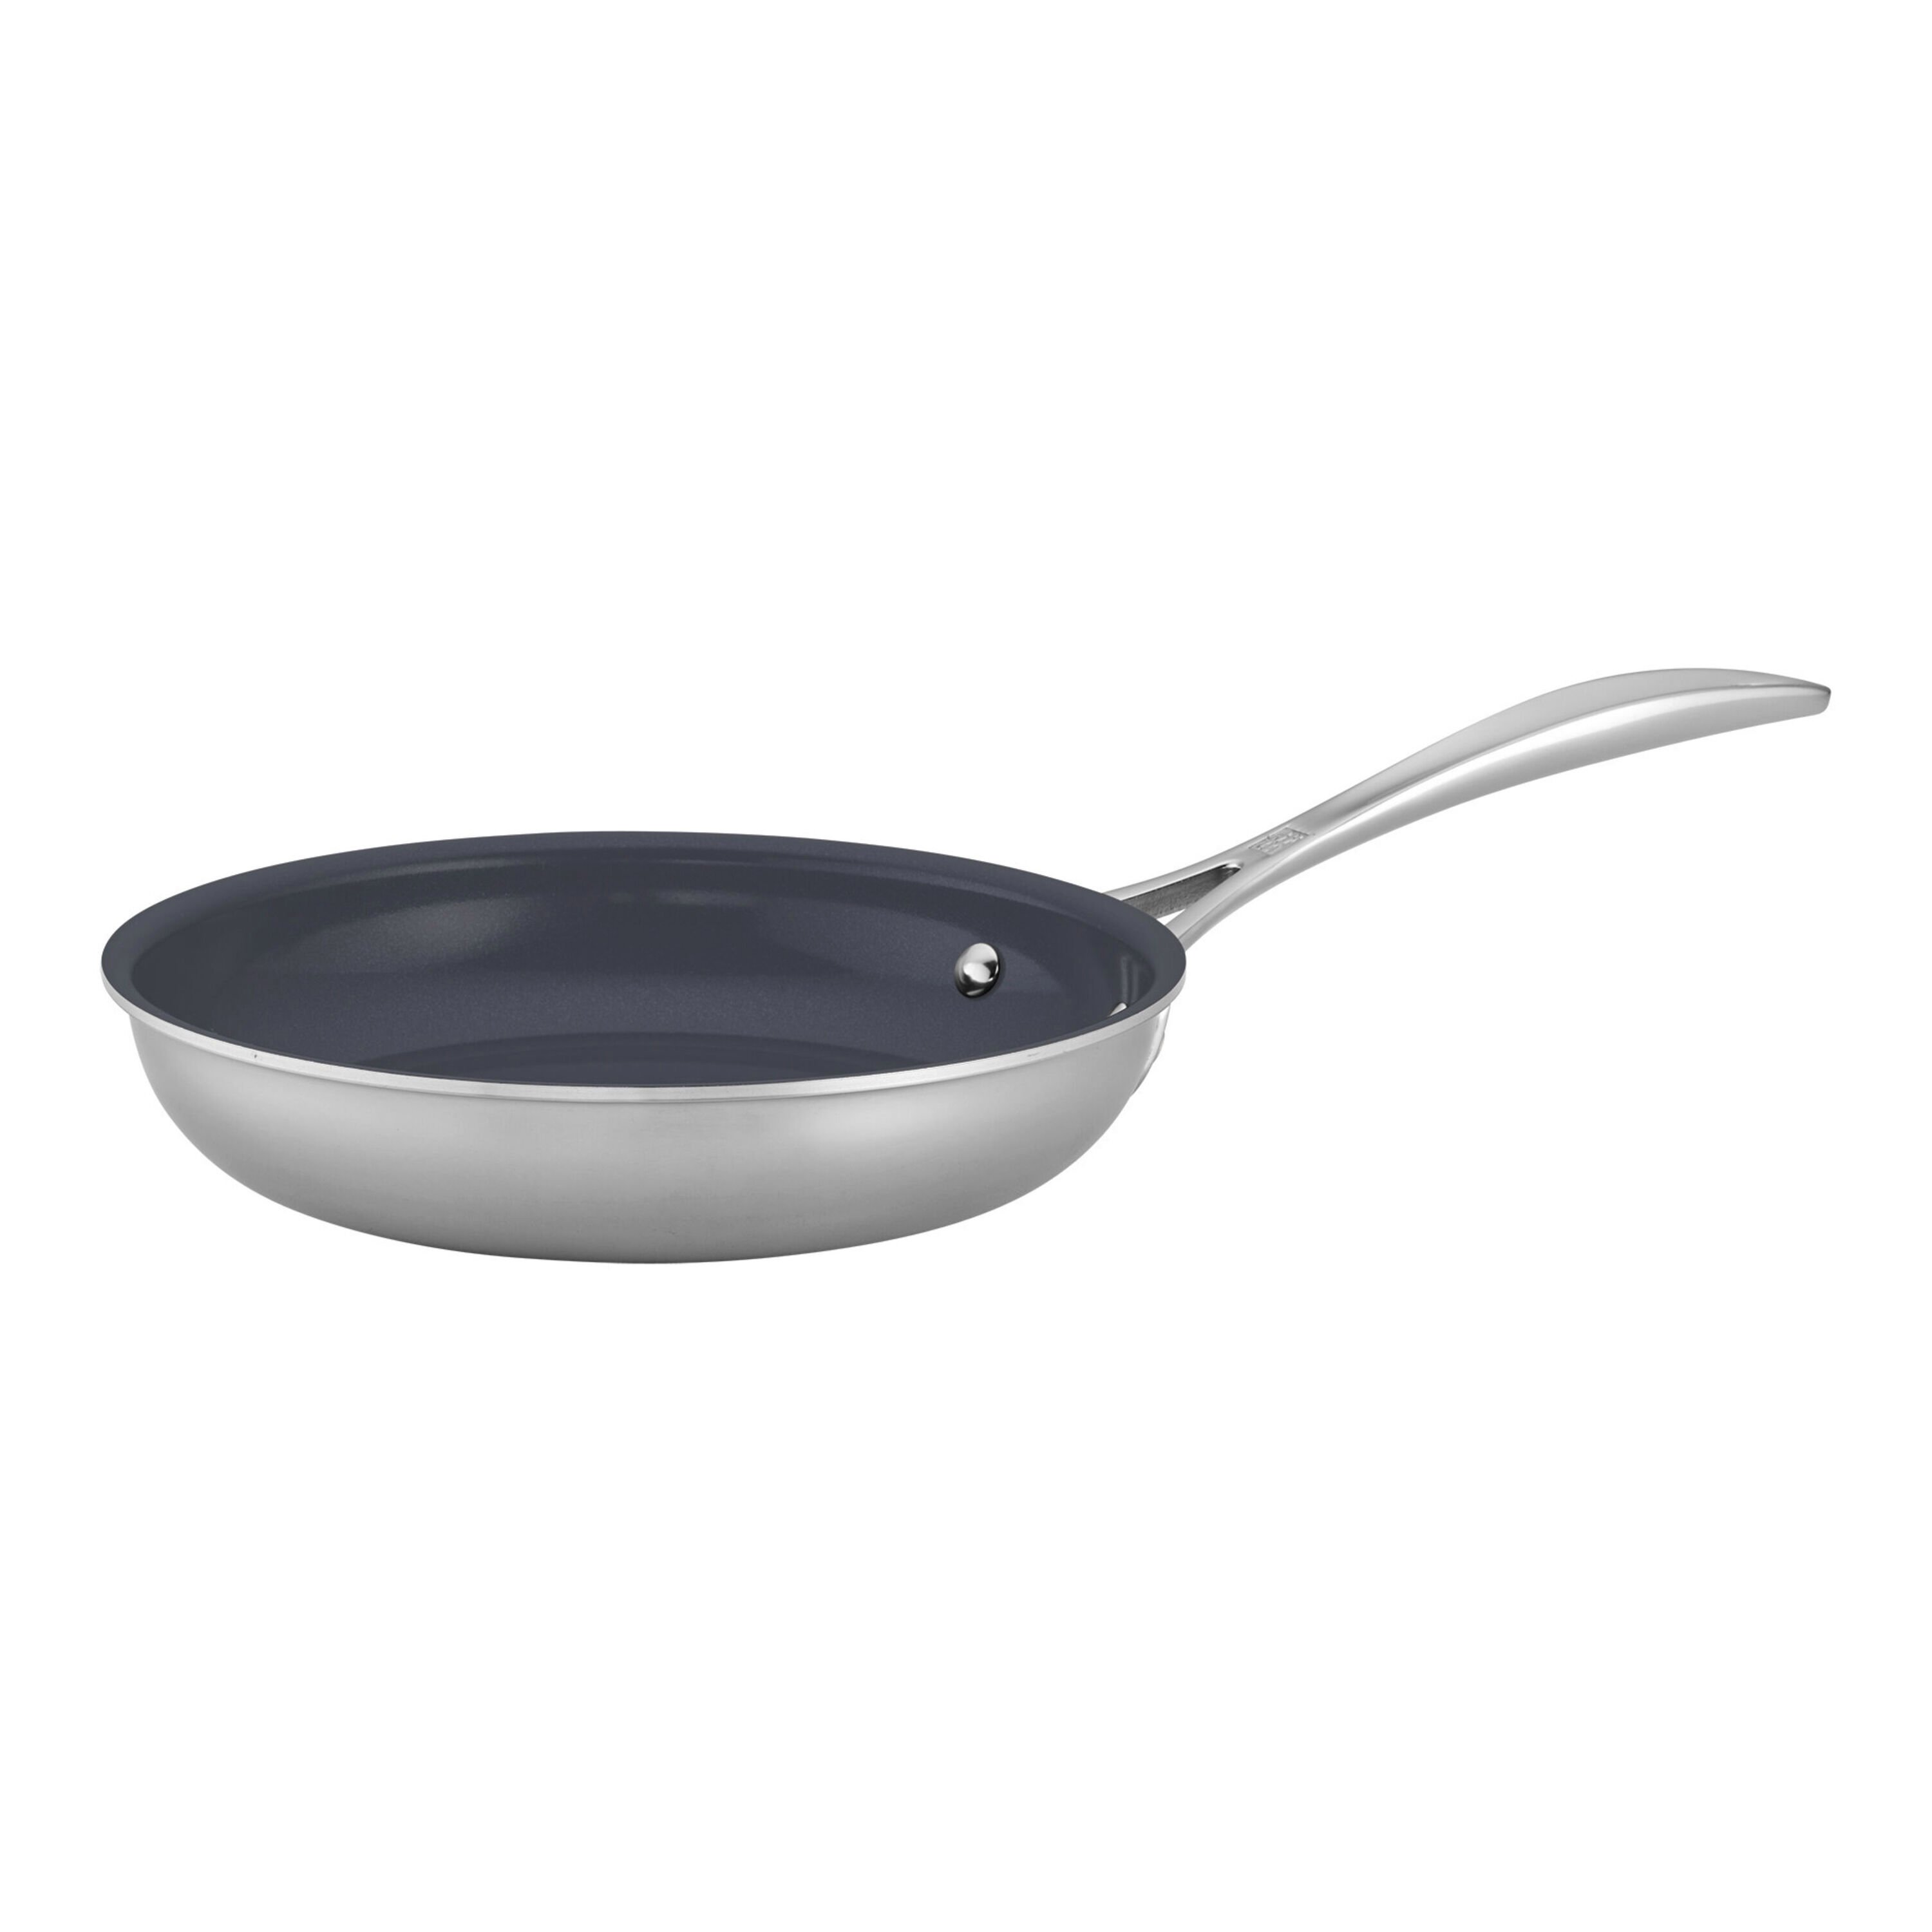 ANEDER Frying Pan with Lid Skillet Nonstick 10 inch Carbon Steel Wok Pan  Woks and Stir Fry Pans for Electric,Induction and Gas Stoves